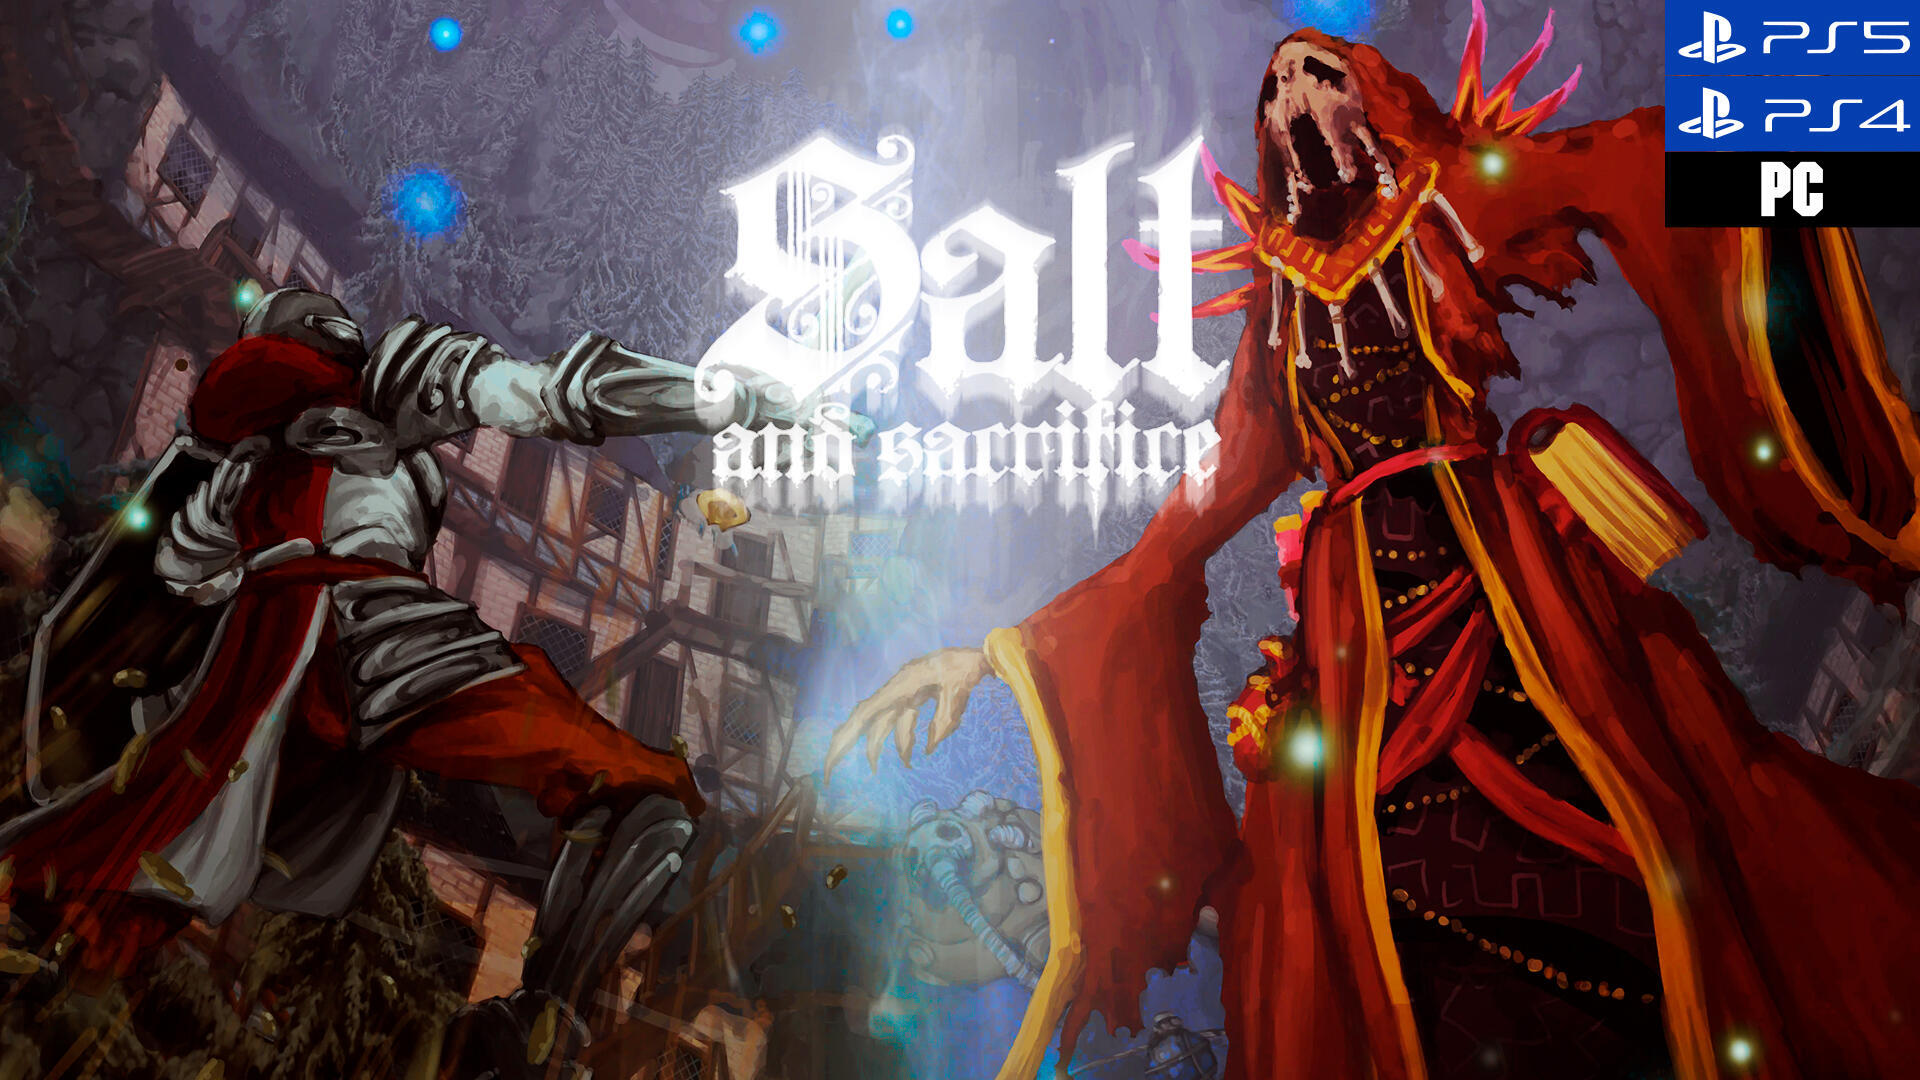 Salt and Sacrifice for apple download free